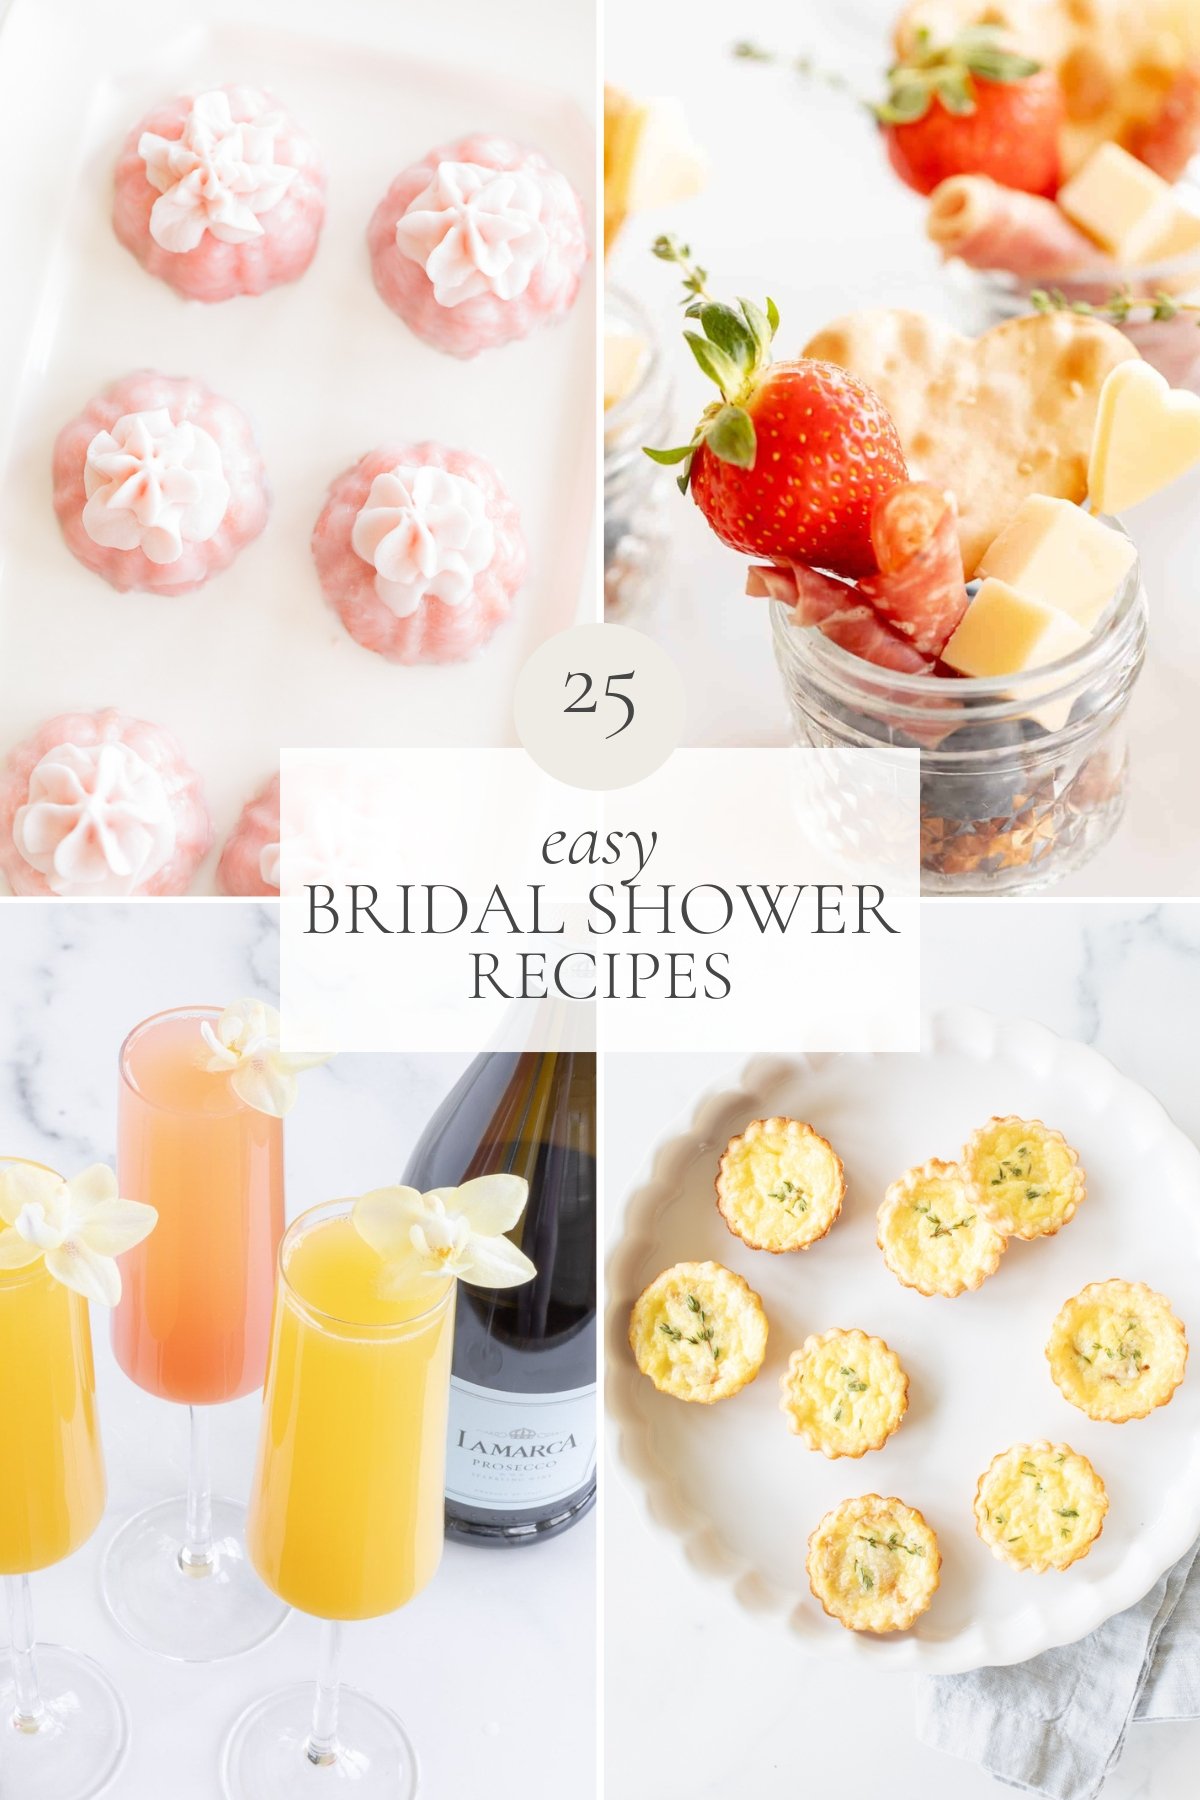 An assortment of four delightful bridal shower recipes, featuring pink pastries, a jar with strawberries and cheese, mimosas adorned with yellow butterflies, and small quiches surrounding a "25 Easy Bridal Shower Recipes" label.